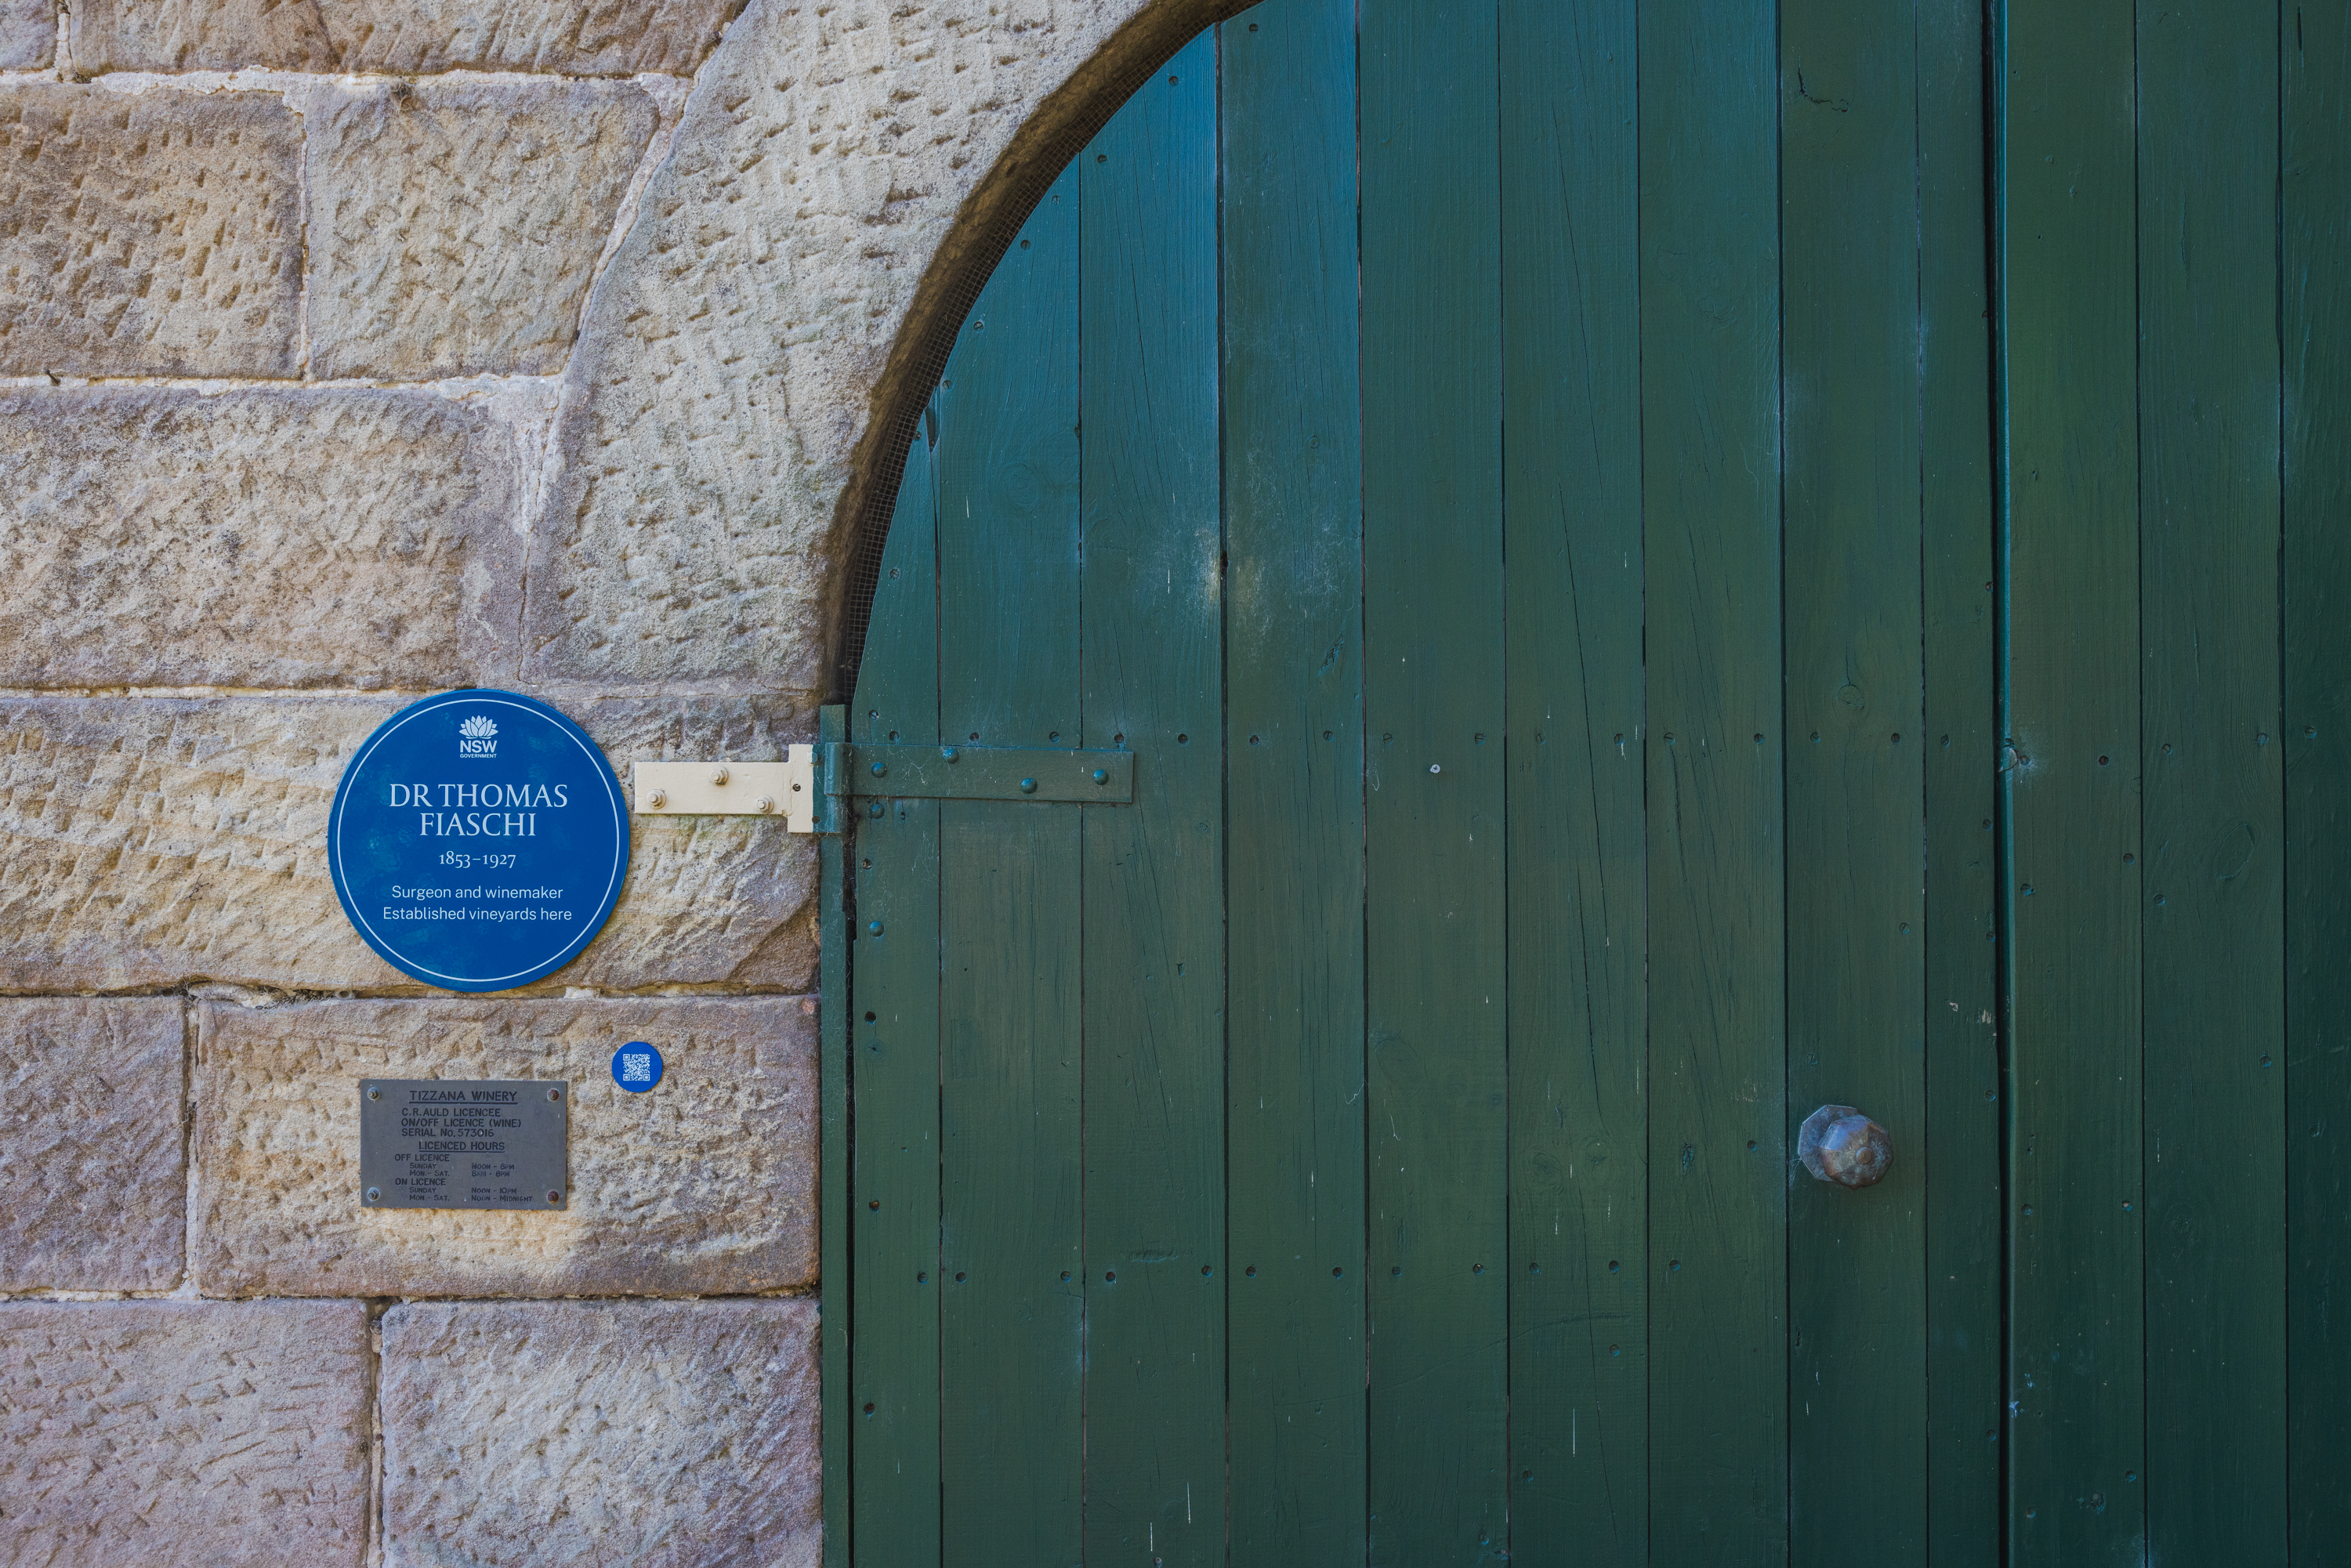 Image 6 of 6 - A photo of a blue plaque on a sandstone wall to the left of a green barn door